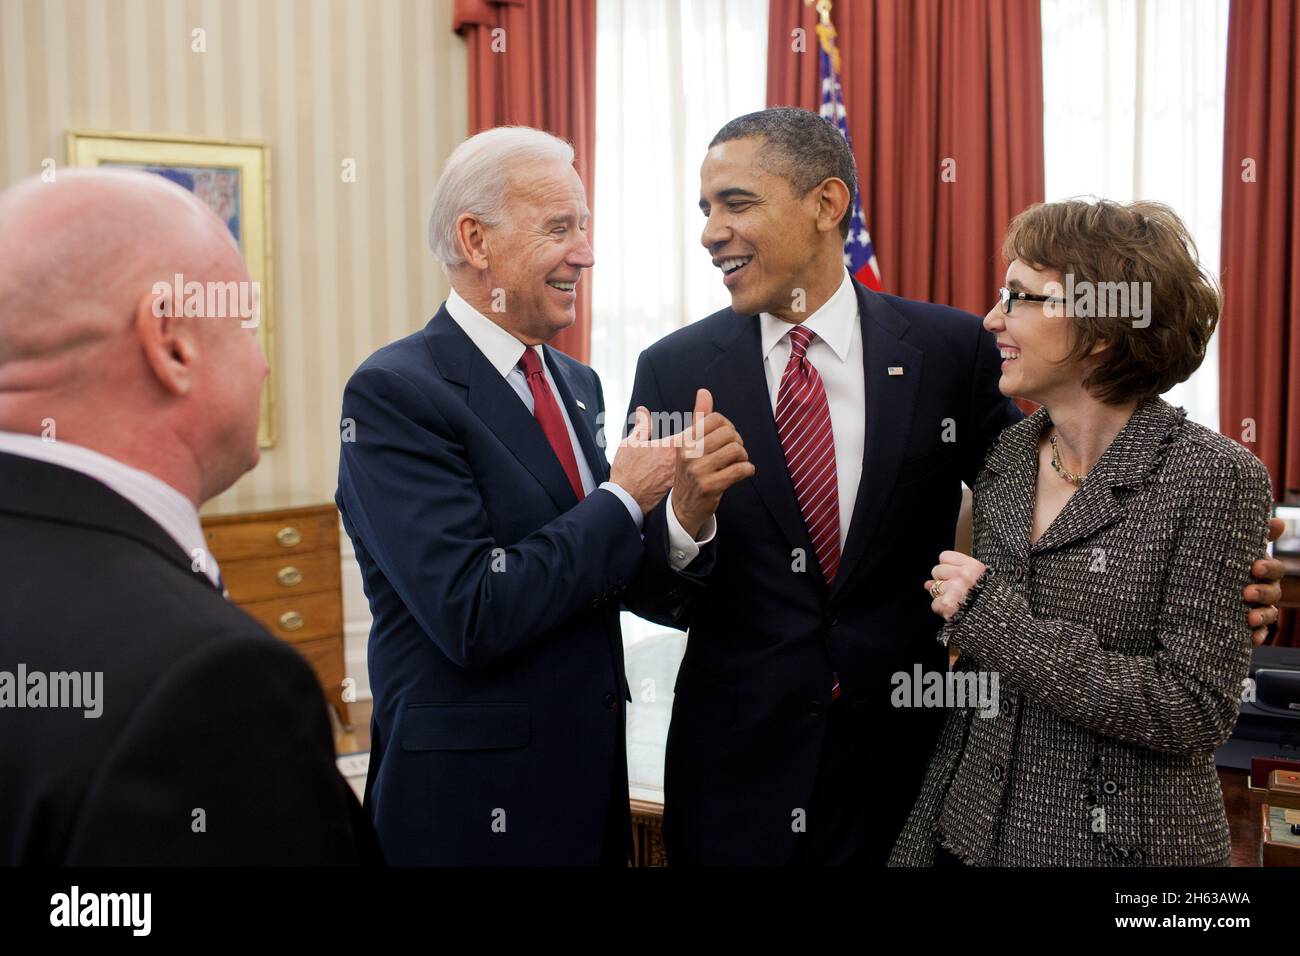 President Barack Obama and Vice President Joe Biden talk with former Representative Gabrielle Giffords and her husband, Mark Kelly, after the President signed H.R. 3801, the Ultralight Aircraft Smuggling Prevention Act of 2012, in the Oval Office, Feb. 10, 2012. The bill was the last piece of legislation that Giffords sponsored and voted on in the U.S. House of Representatives Stock Photo